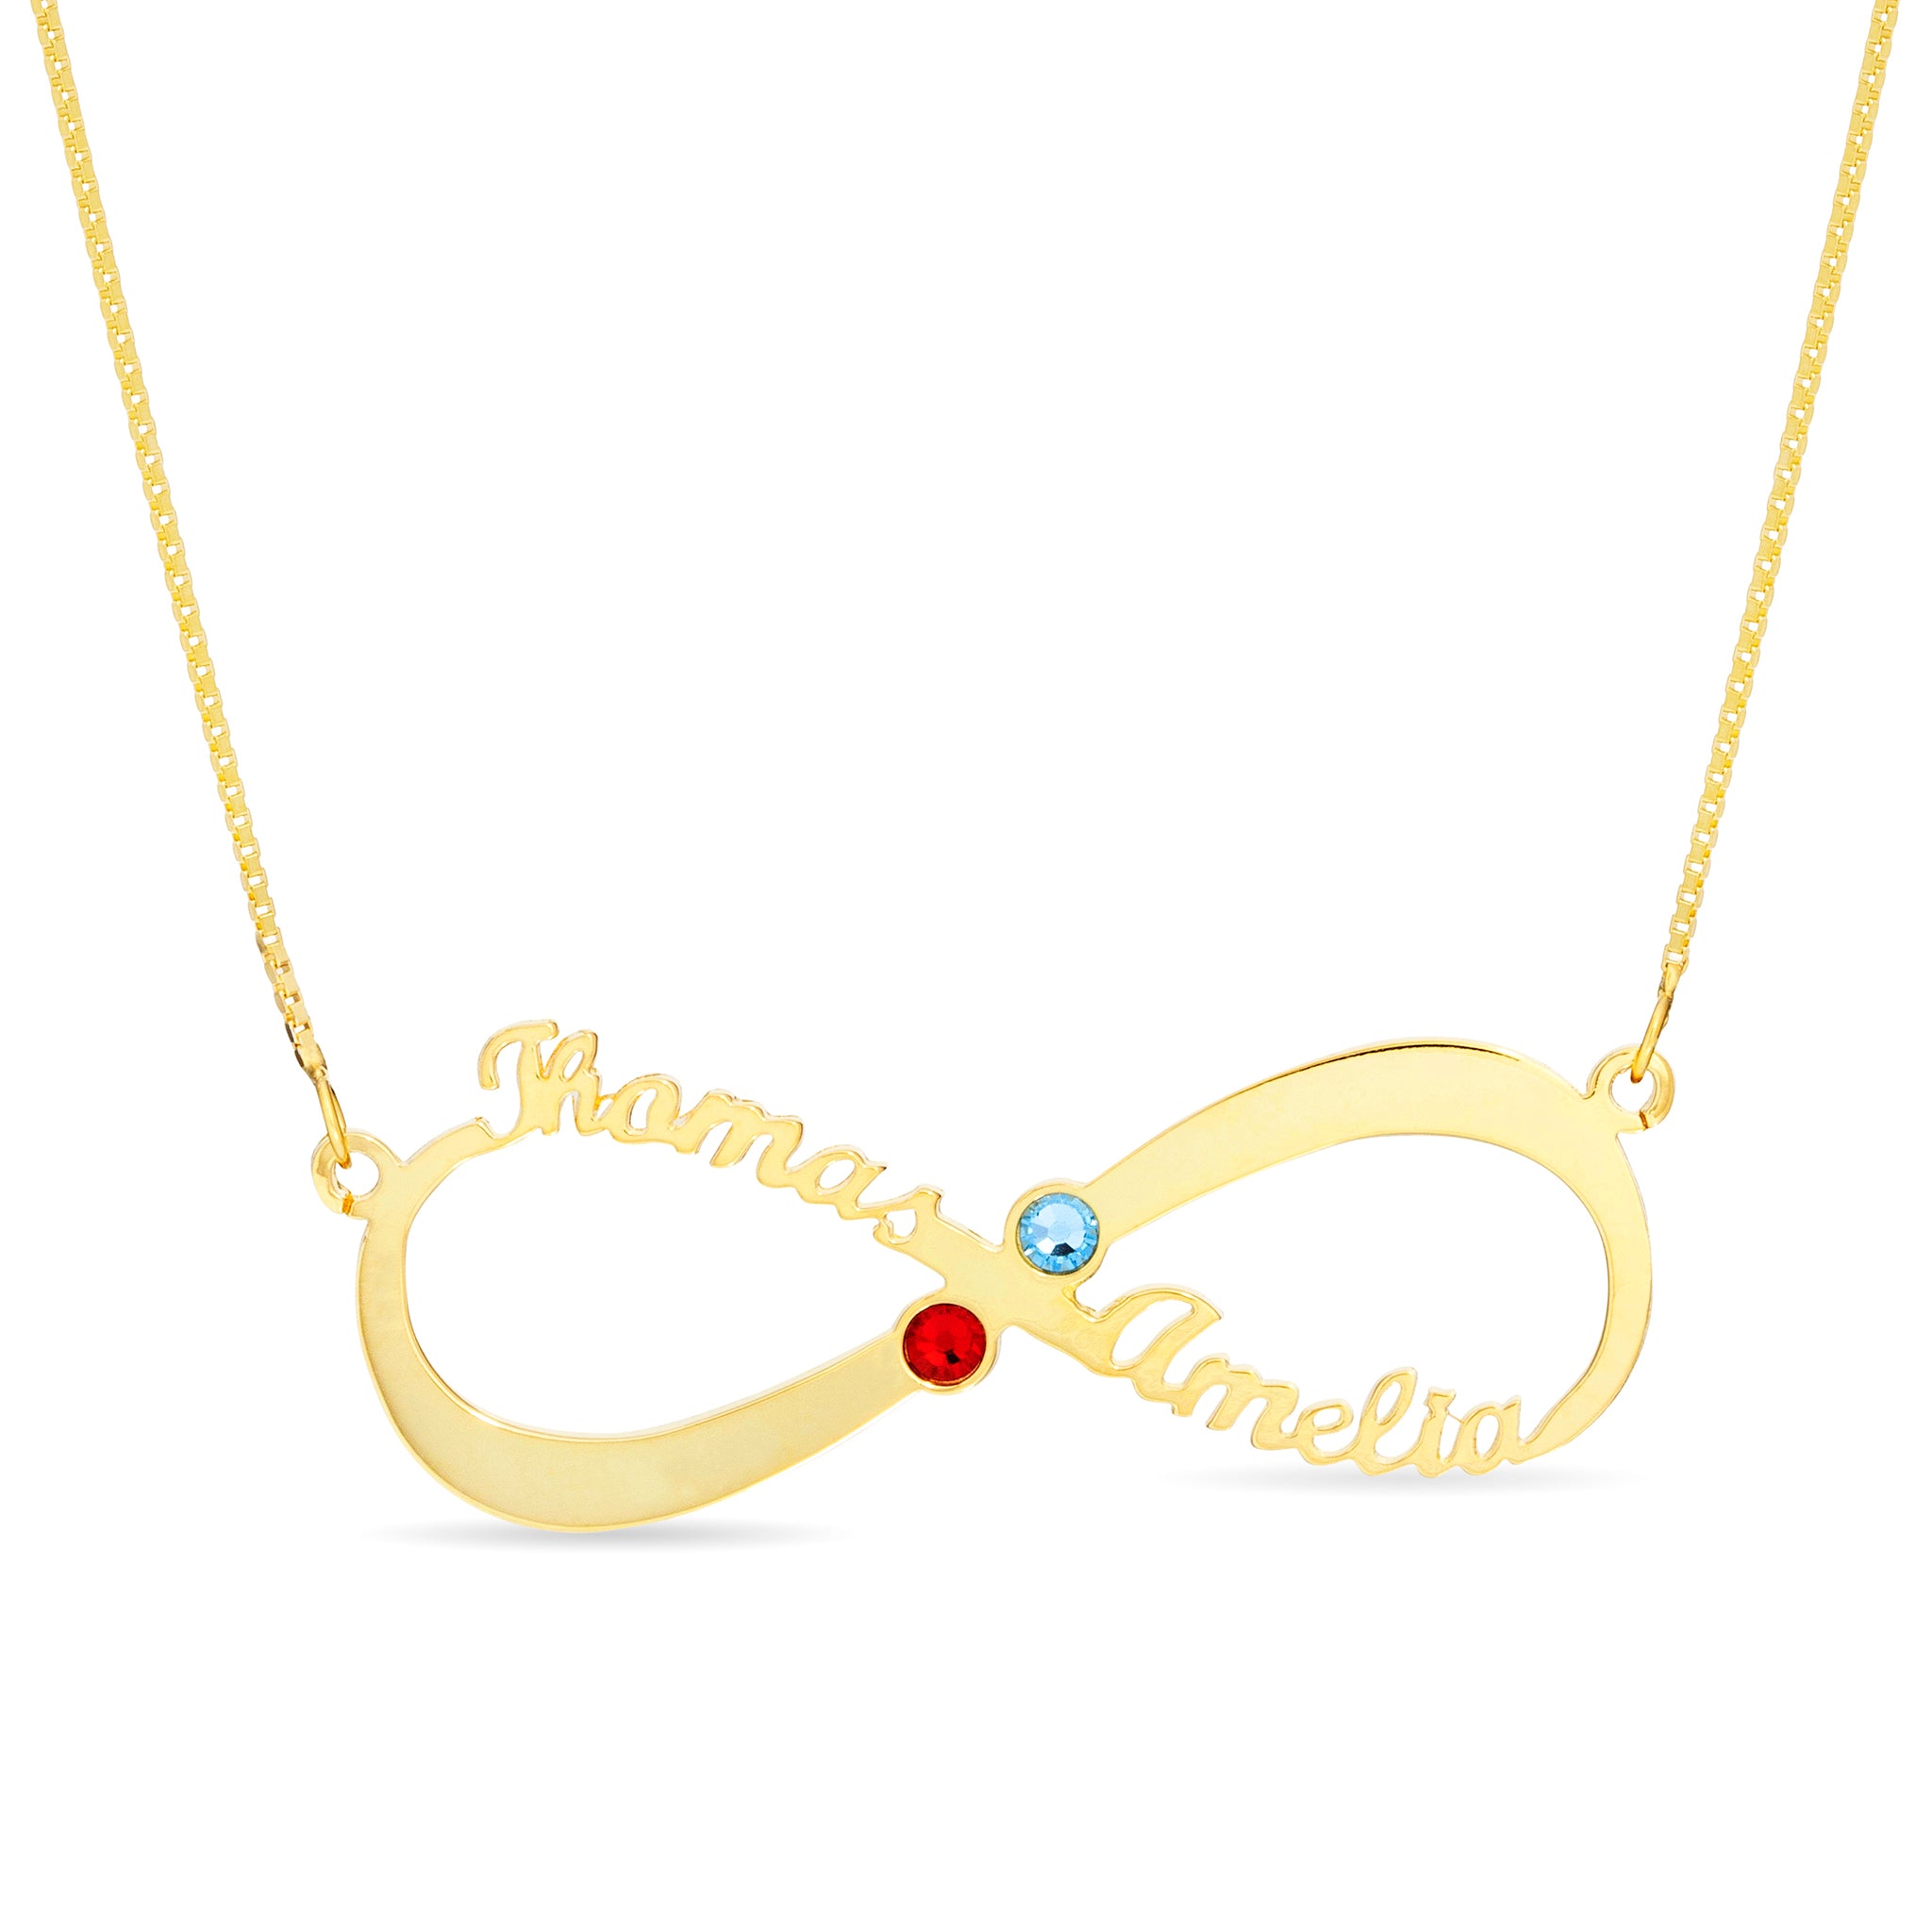 Birthstone Infinity Name Necklace - 2 Names